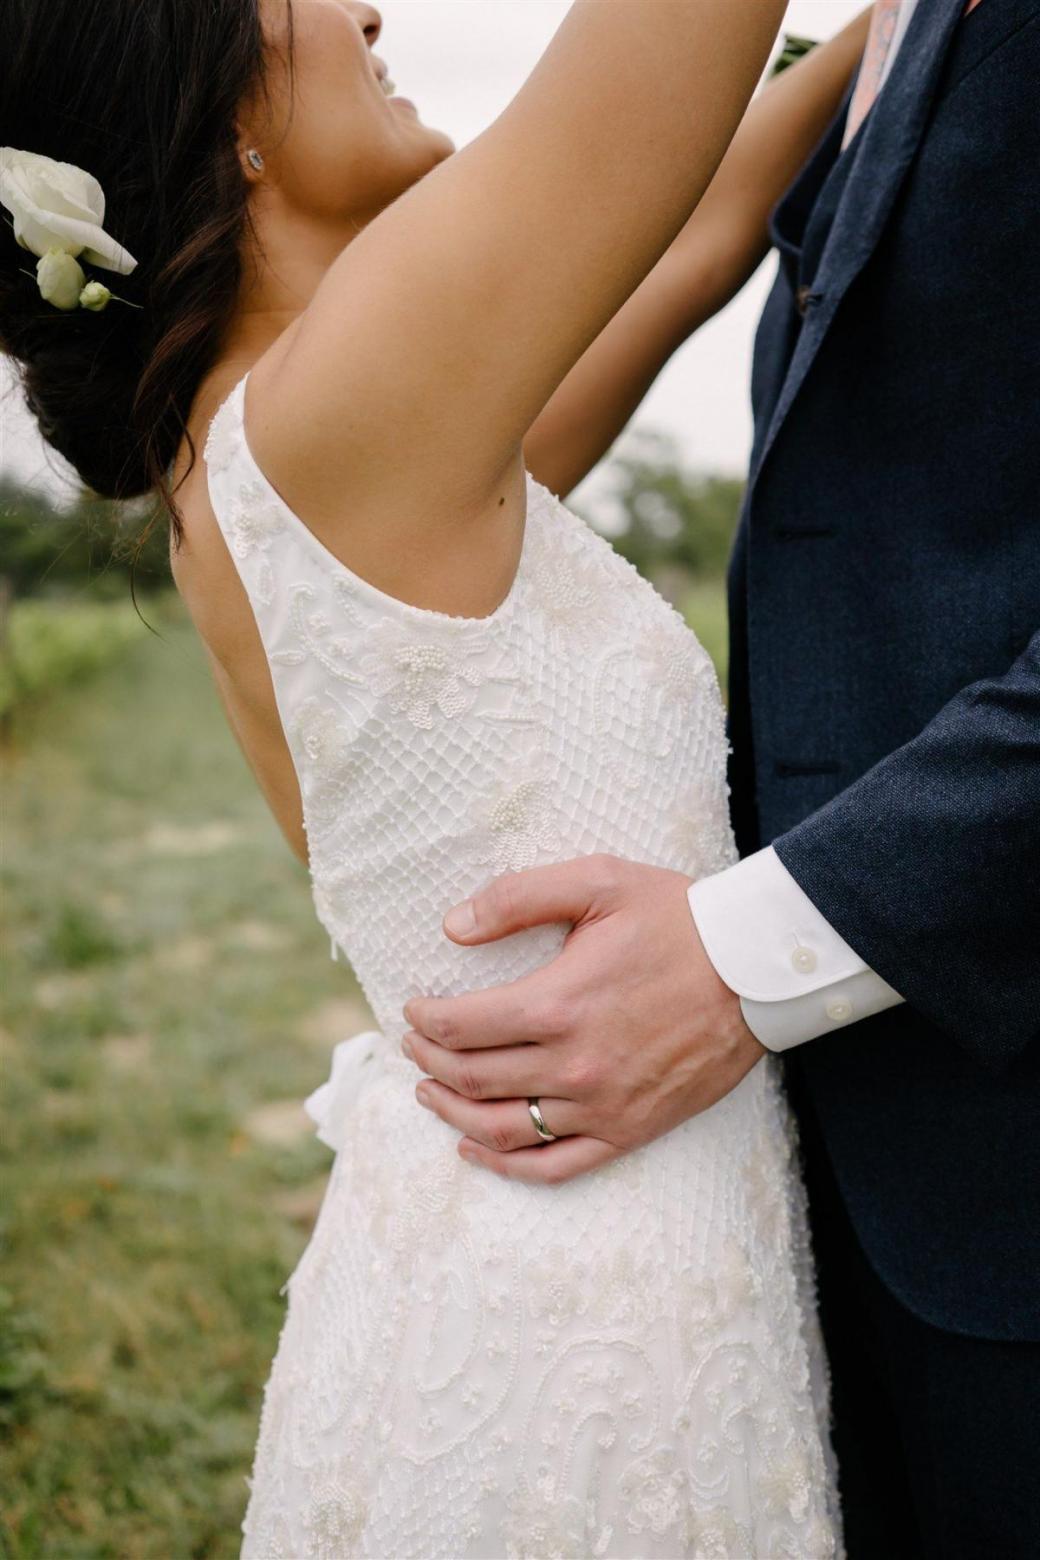 Real bride Jess wore the Luxe Beatrice wedding dress by Karen Willis Holmes.